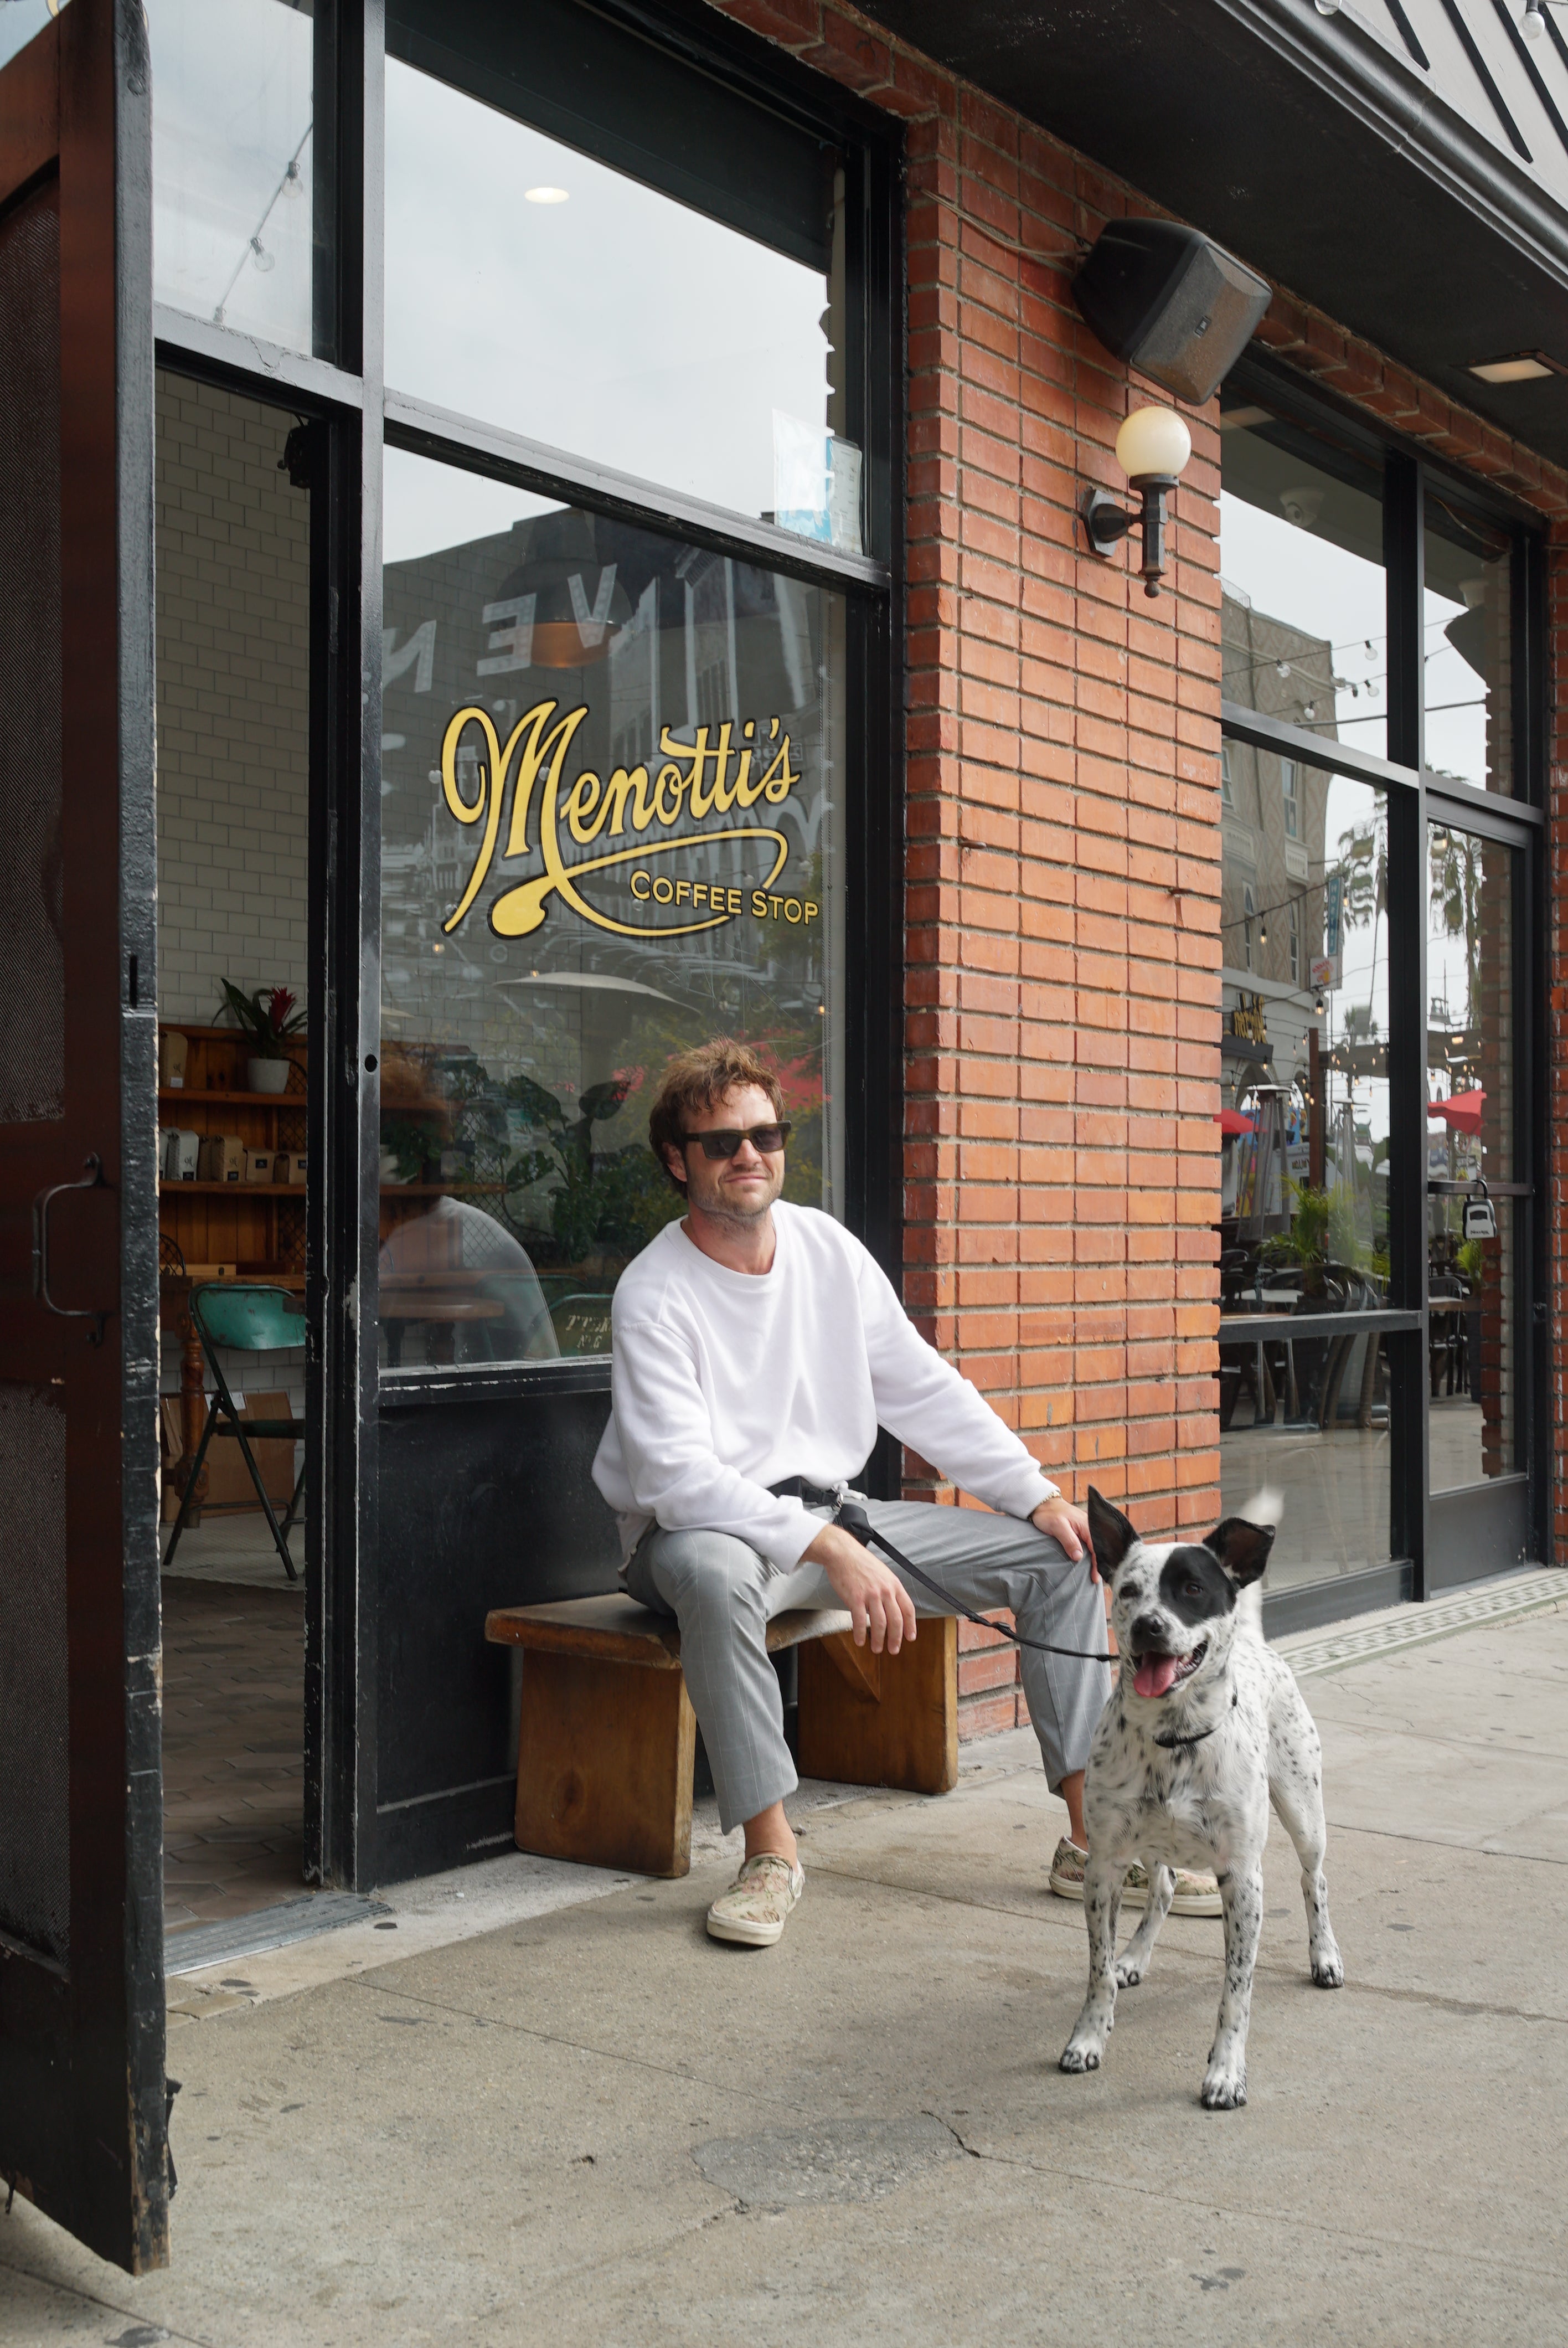 A  man wearing sunglasses and a white sweatshirt sitting on a wooden bench outside Menotti's Coffee Stop, holding the leash of a black and white dog standing next to him. The dog is on a leash from Lulu's from Cali. The man is looking towards the camera, and the coffee shop's logo is visible on the glass door.